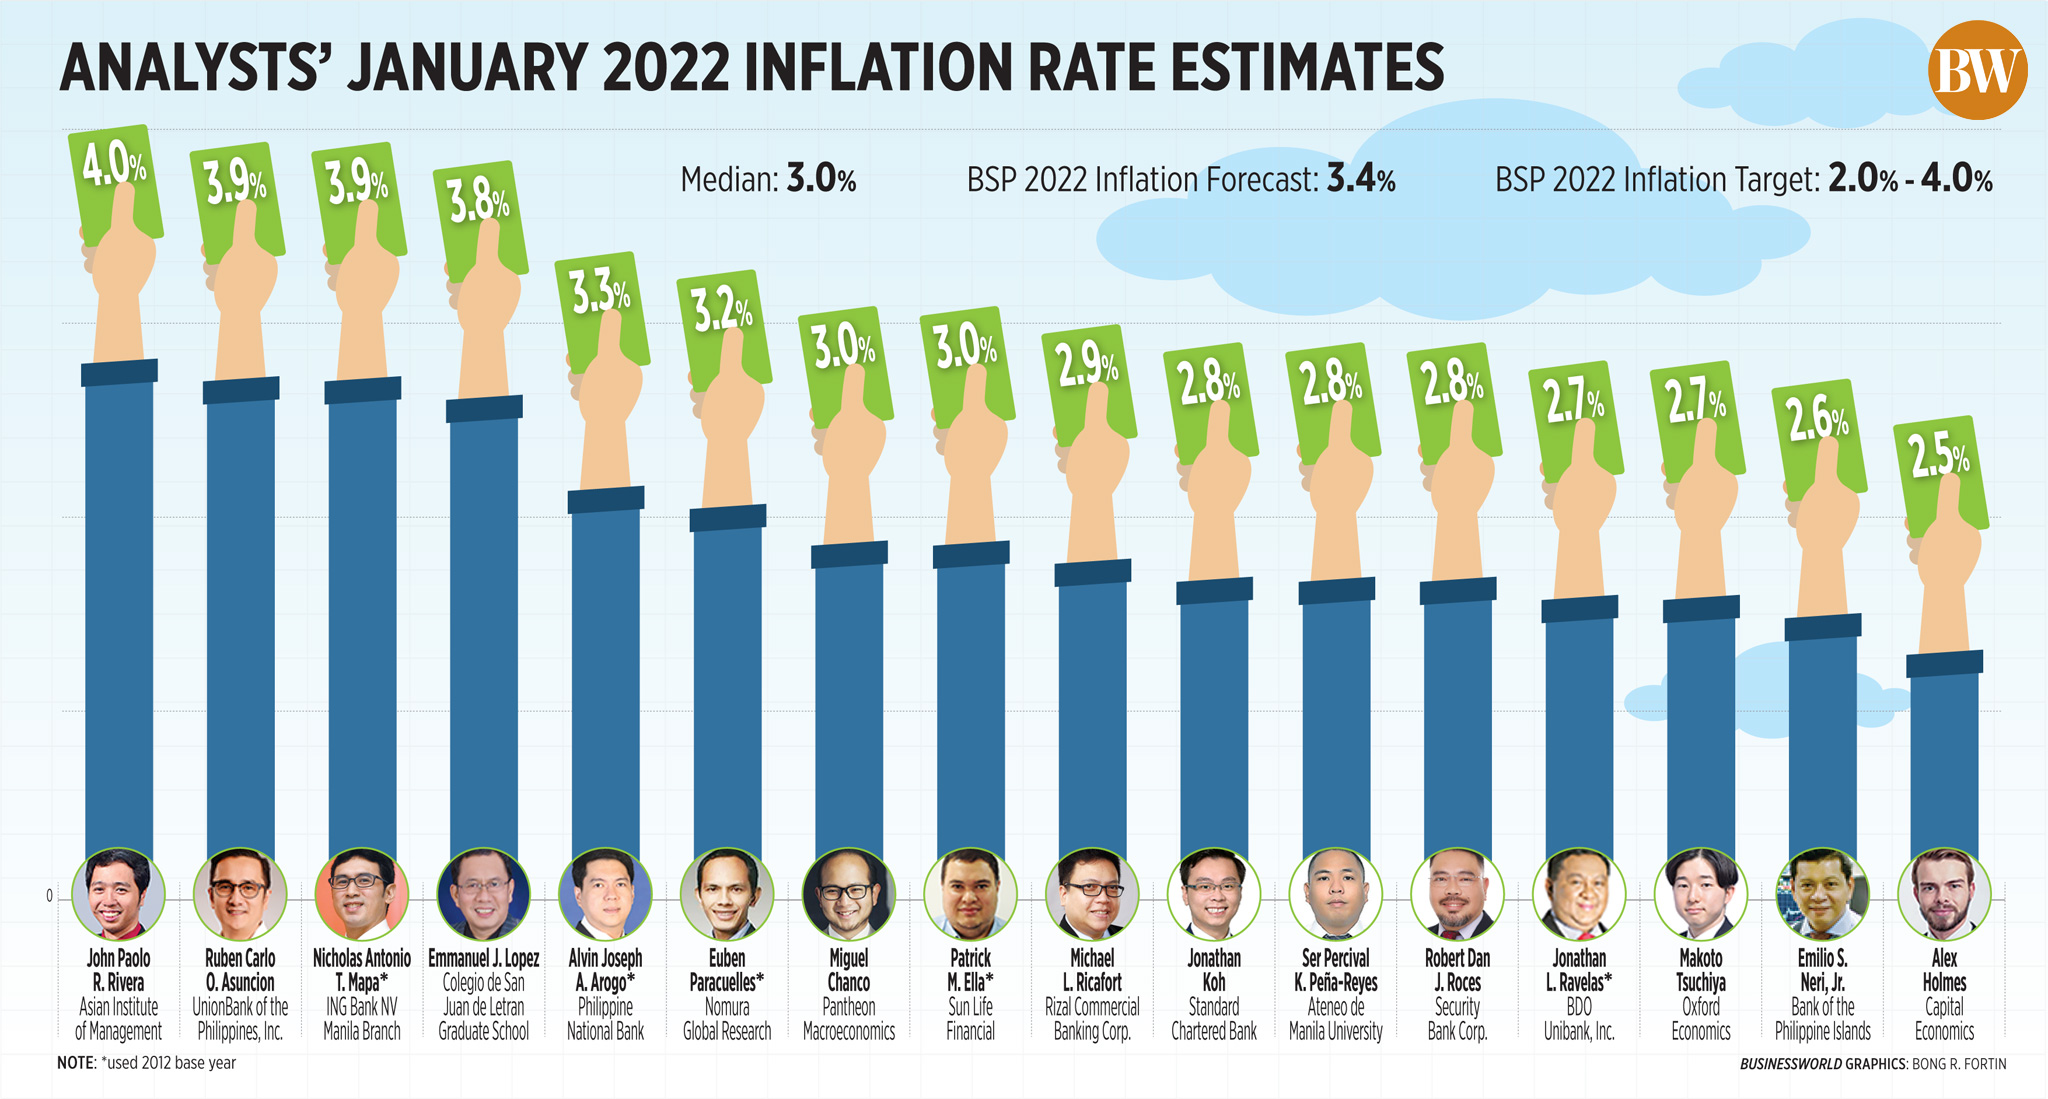 Analysts’ January 2022 inflation rate estimates